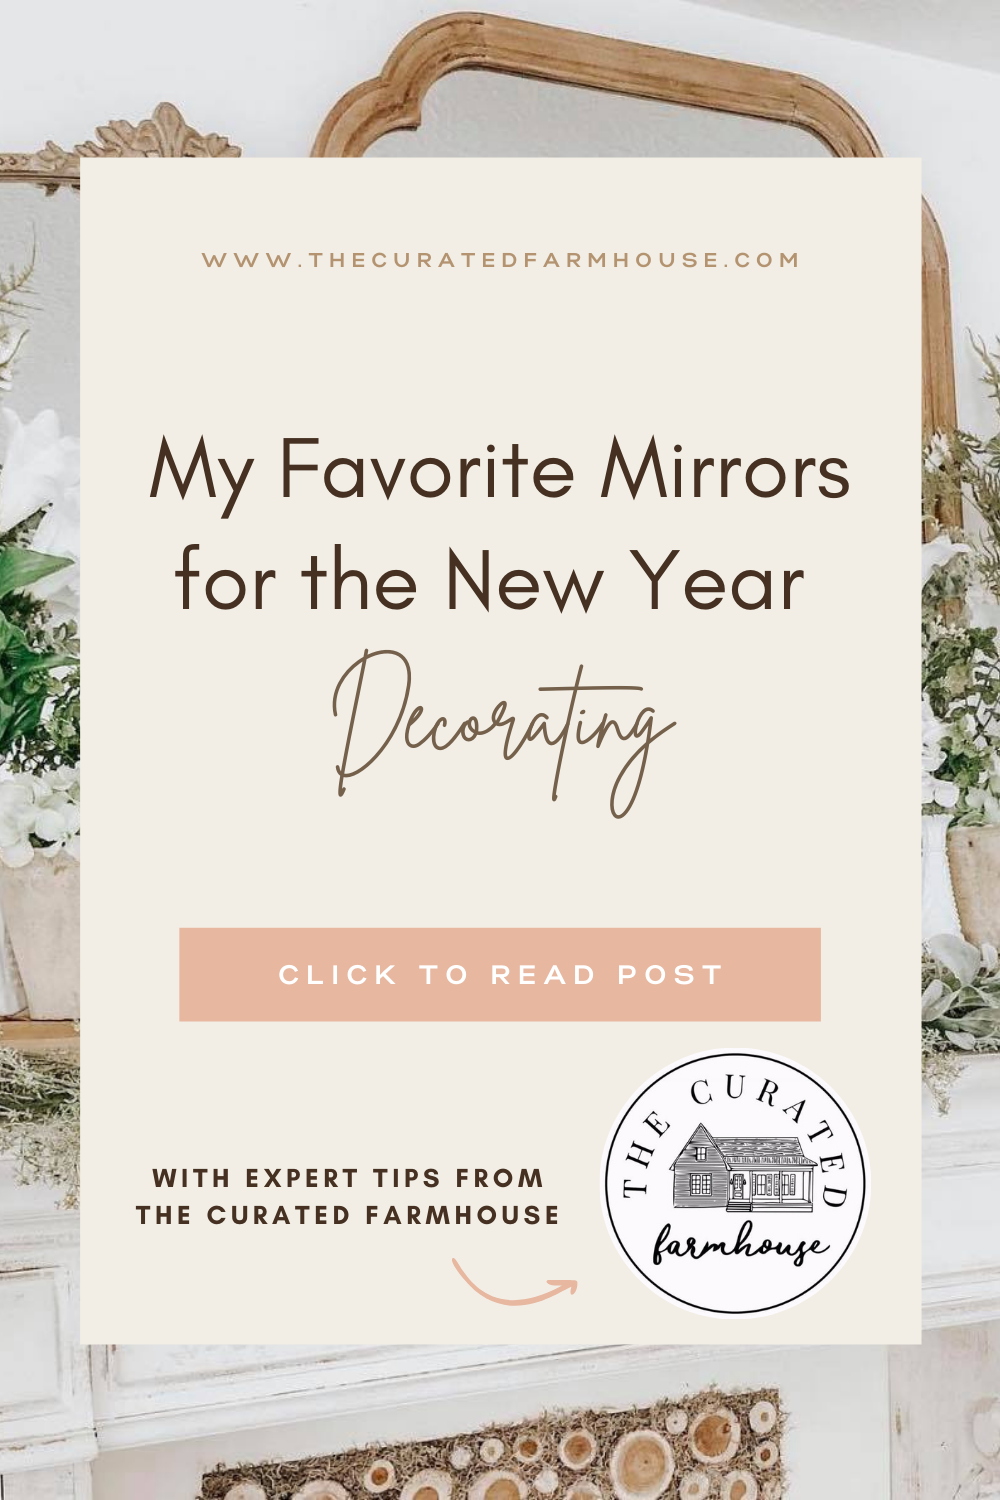 My Favorite Mirrors for the New Year